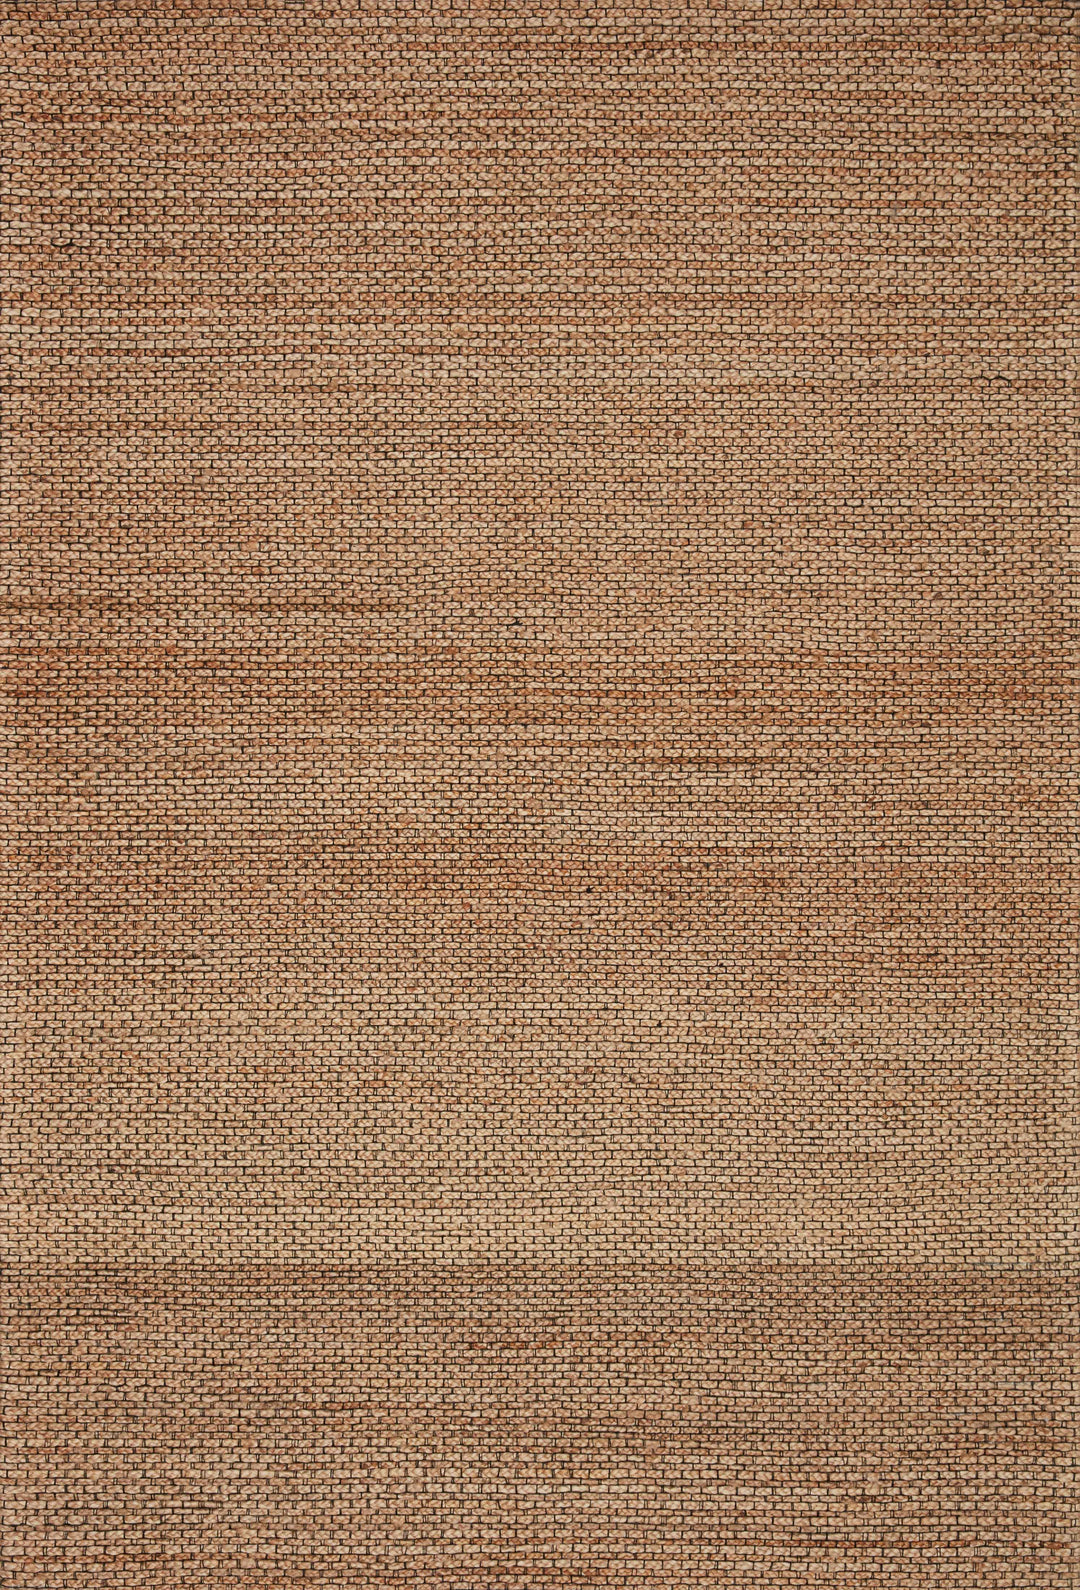 Loloi Lily Natural 9'-3" x 13' Area Rug